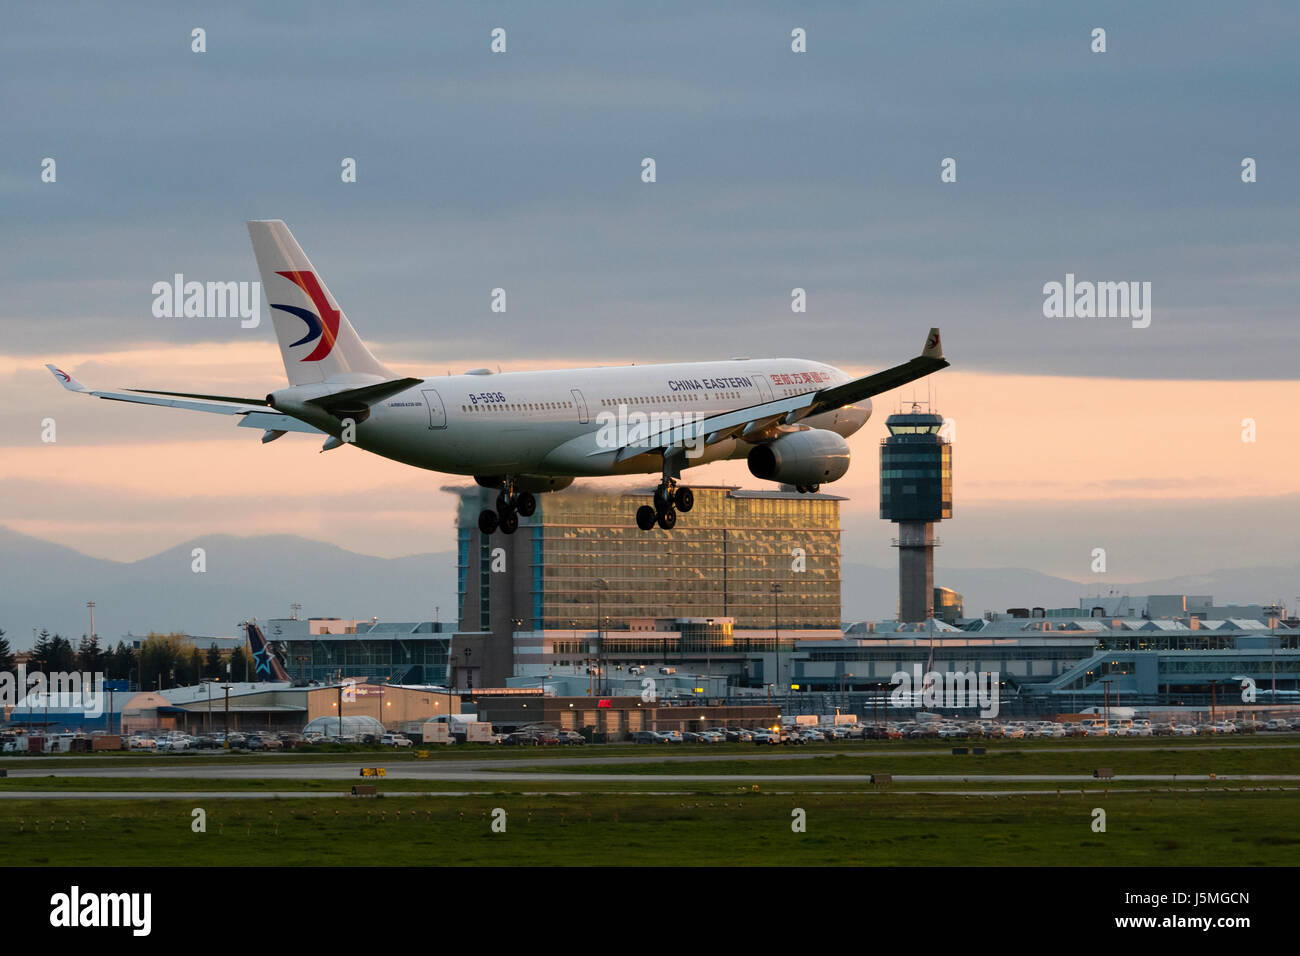 China Eastern Airlines plane airplane landing Vancouver International Airport terminal exterior dusk twilight view Airbus A330 jetliner B-5936 Stock Photo